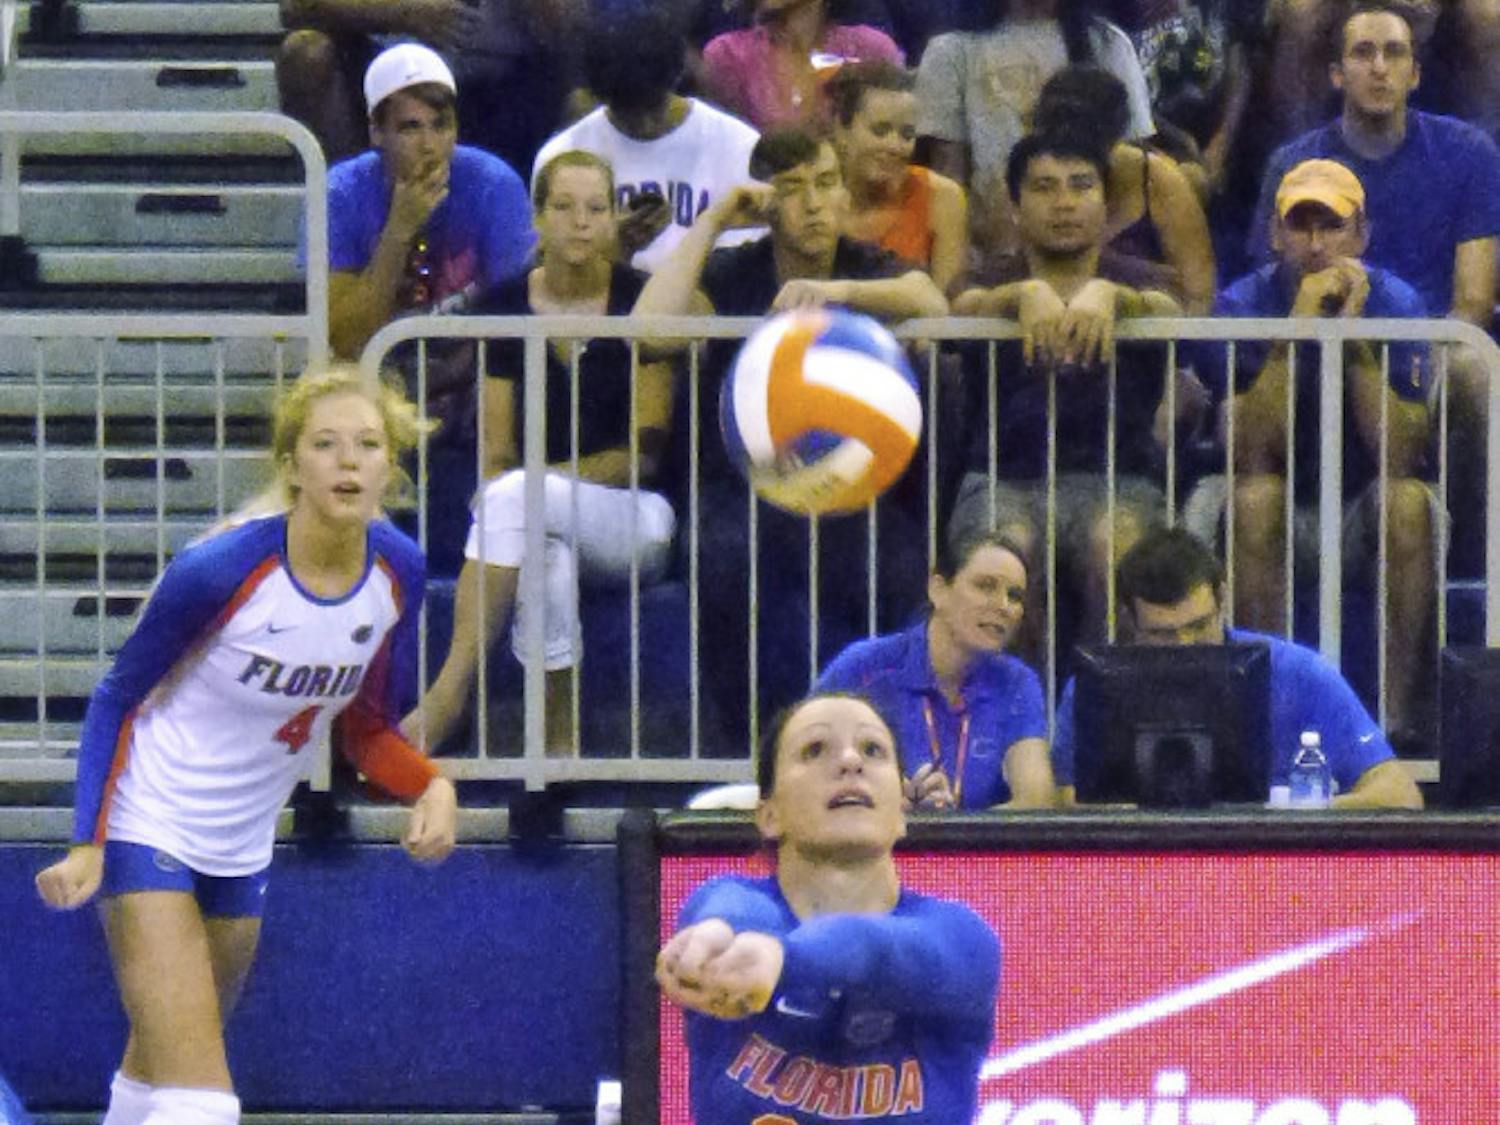 Holly Pole digs the ball during Florida's 3-1 loss to Texas on Saturday Sept. 6, in the O'Connell Center